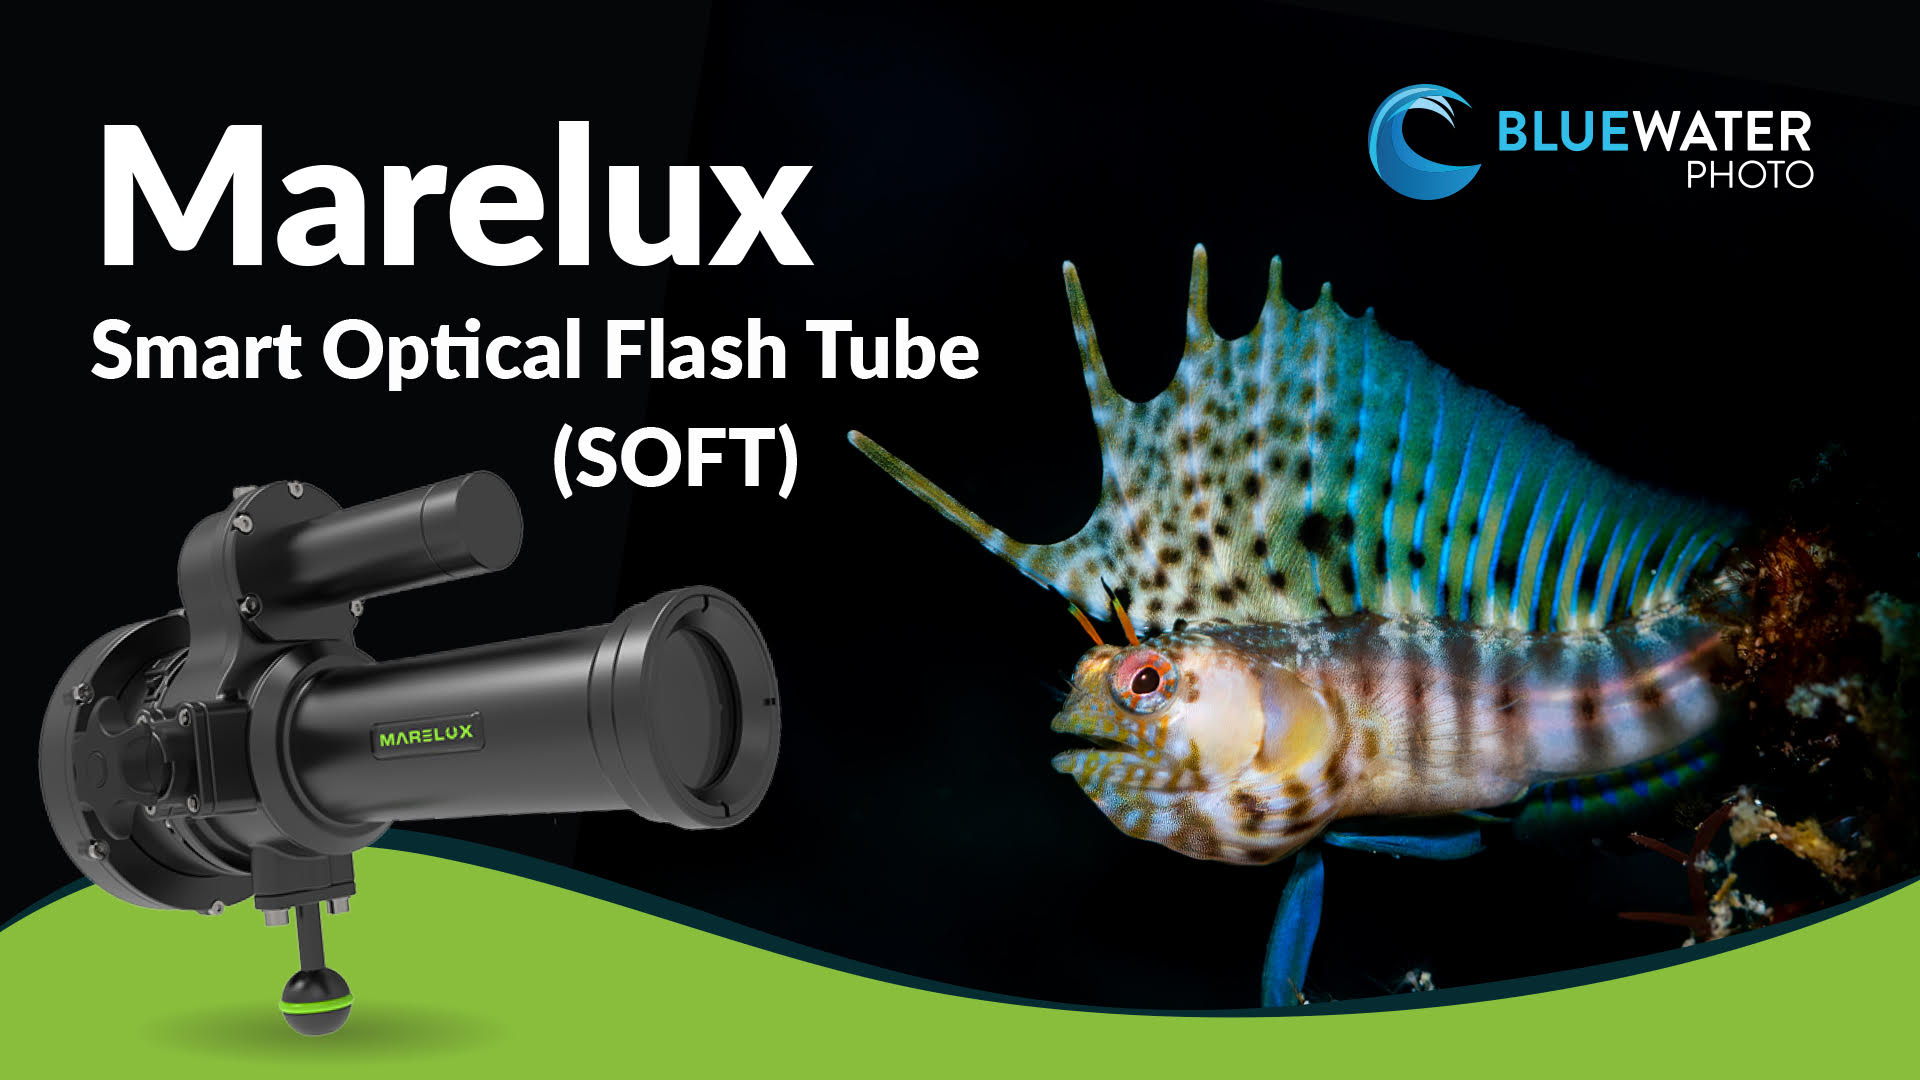 Marelux Smart Optical Flash Tube (SOFT) Snoot Underwater Review